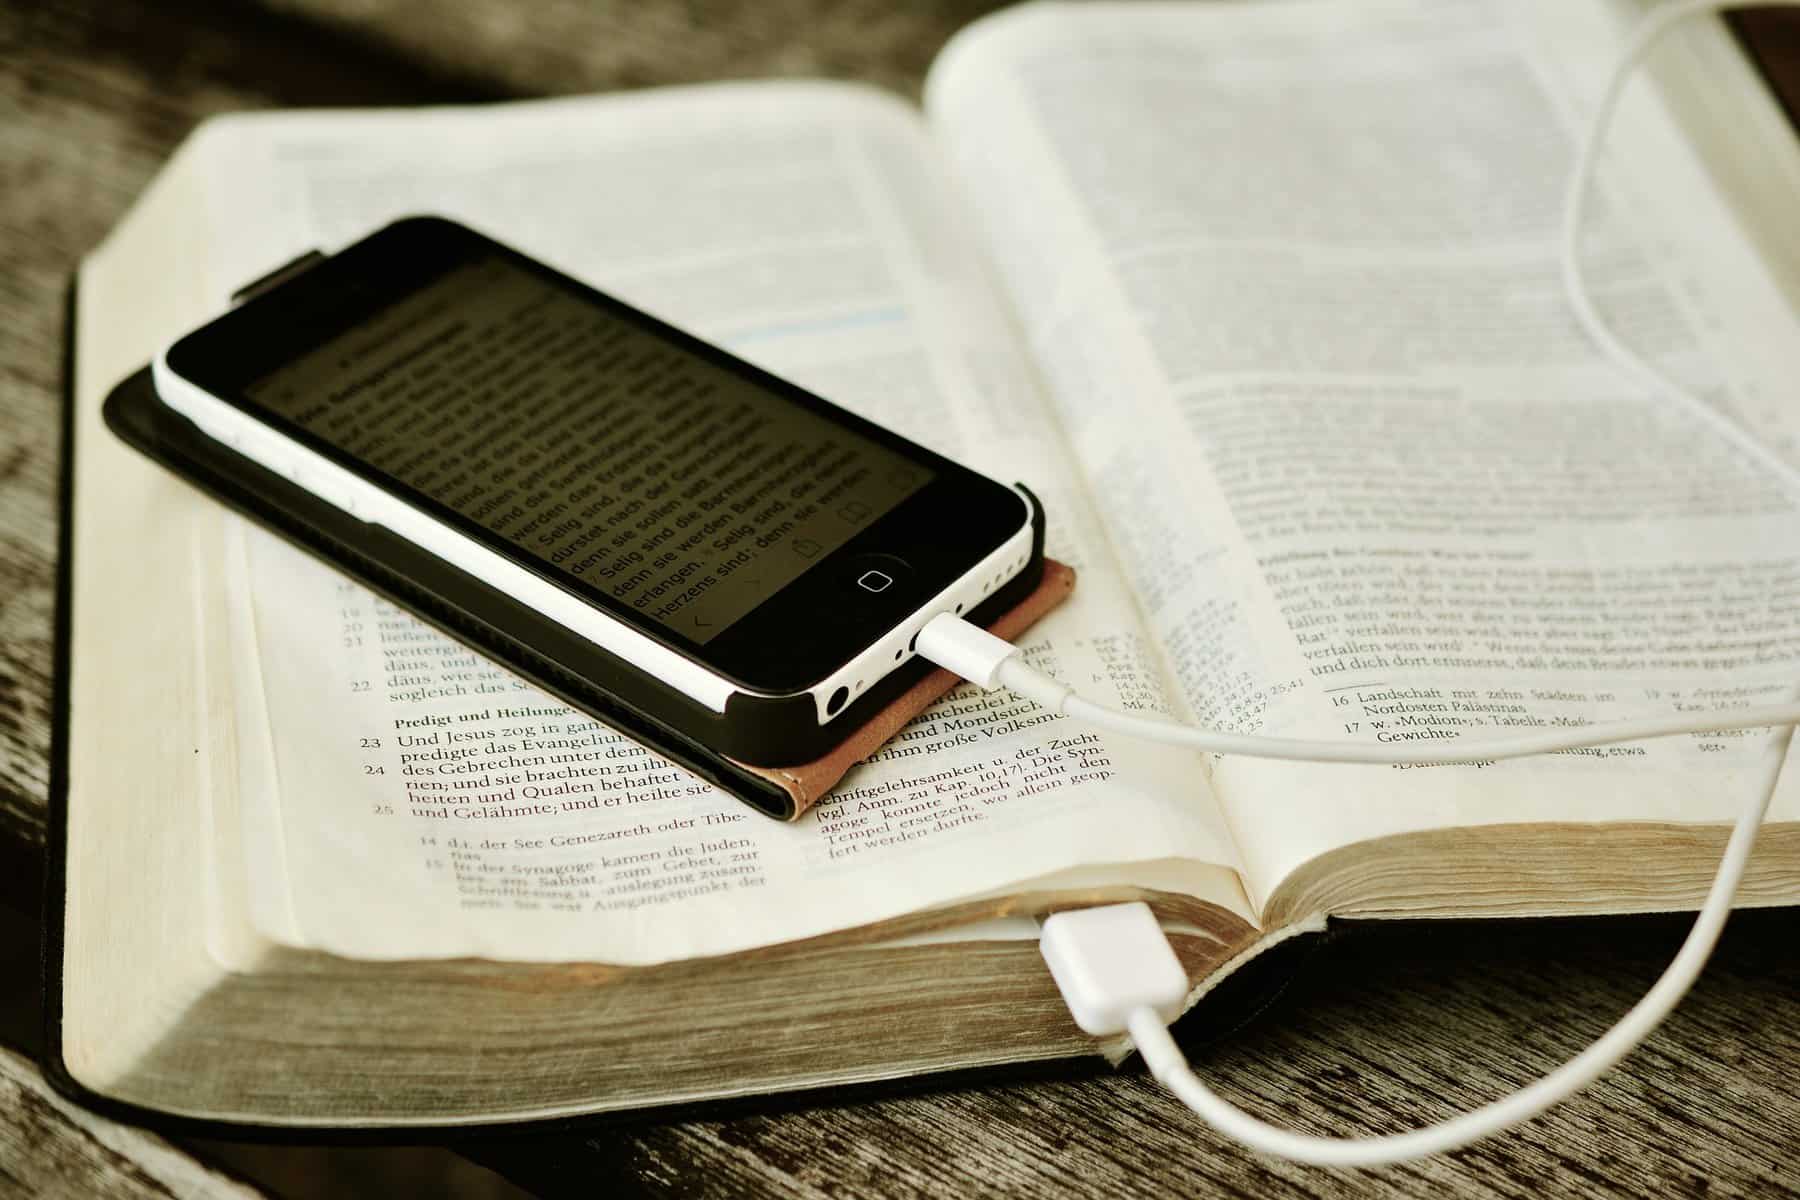 A smart phone is seen sitting on a bible with its cord appearing to be plugged into the open bible.